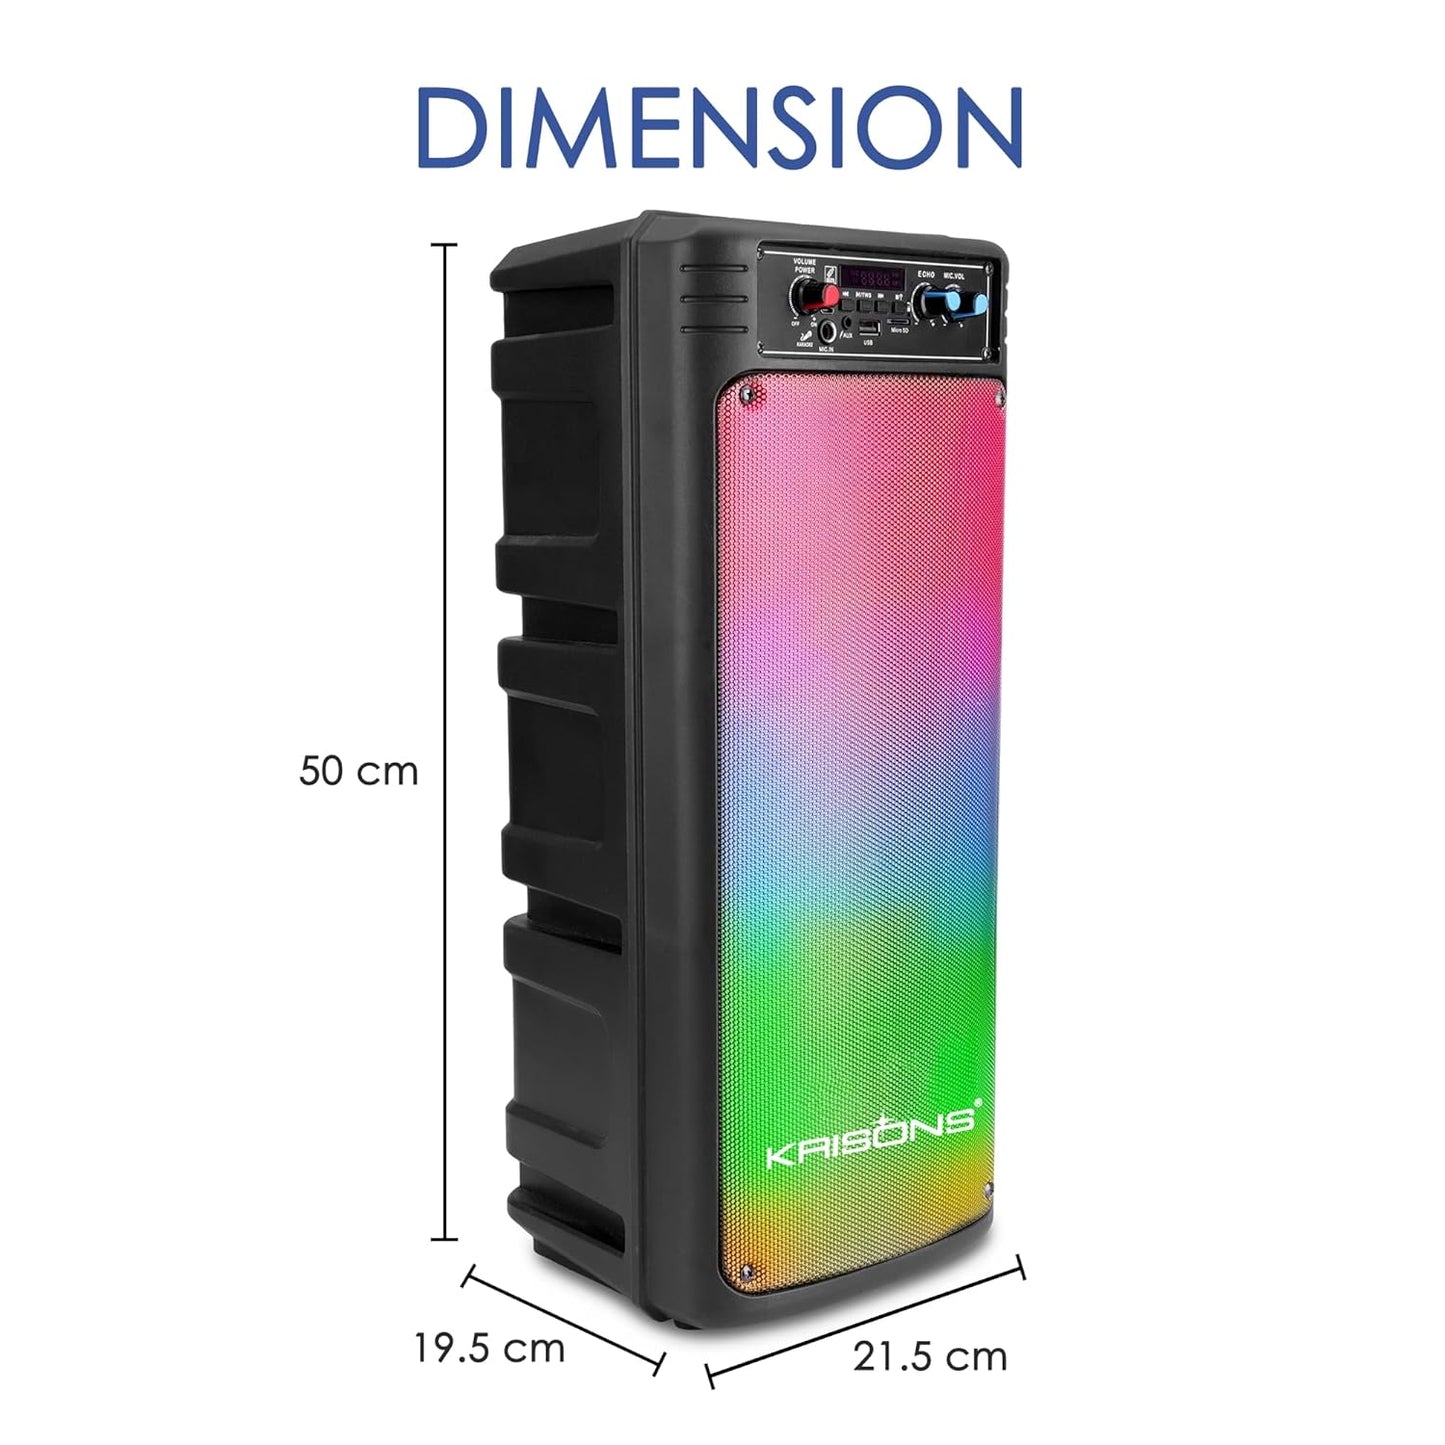 Krisons Disco Double Woofer 80 W Multi-Media Bluetooth Party Tower Speaker with Wireless Mic for Karaoke, in Built Digital Display, RGB Lights, USB, SD Card and FM Radio